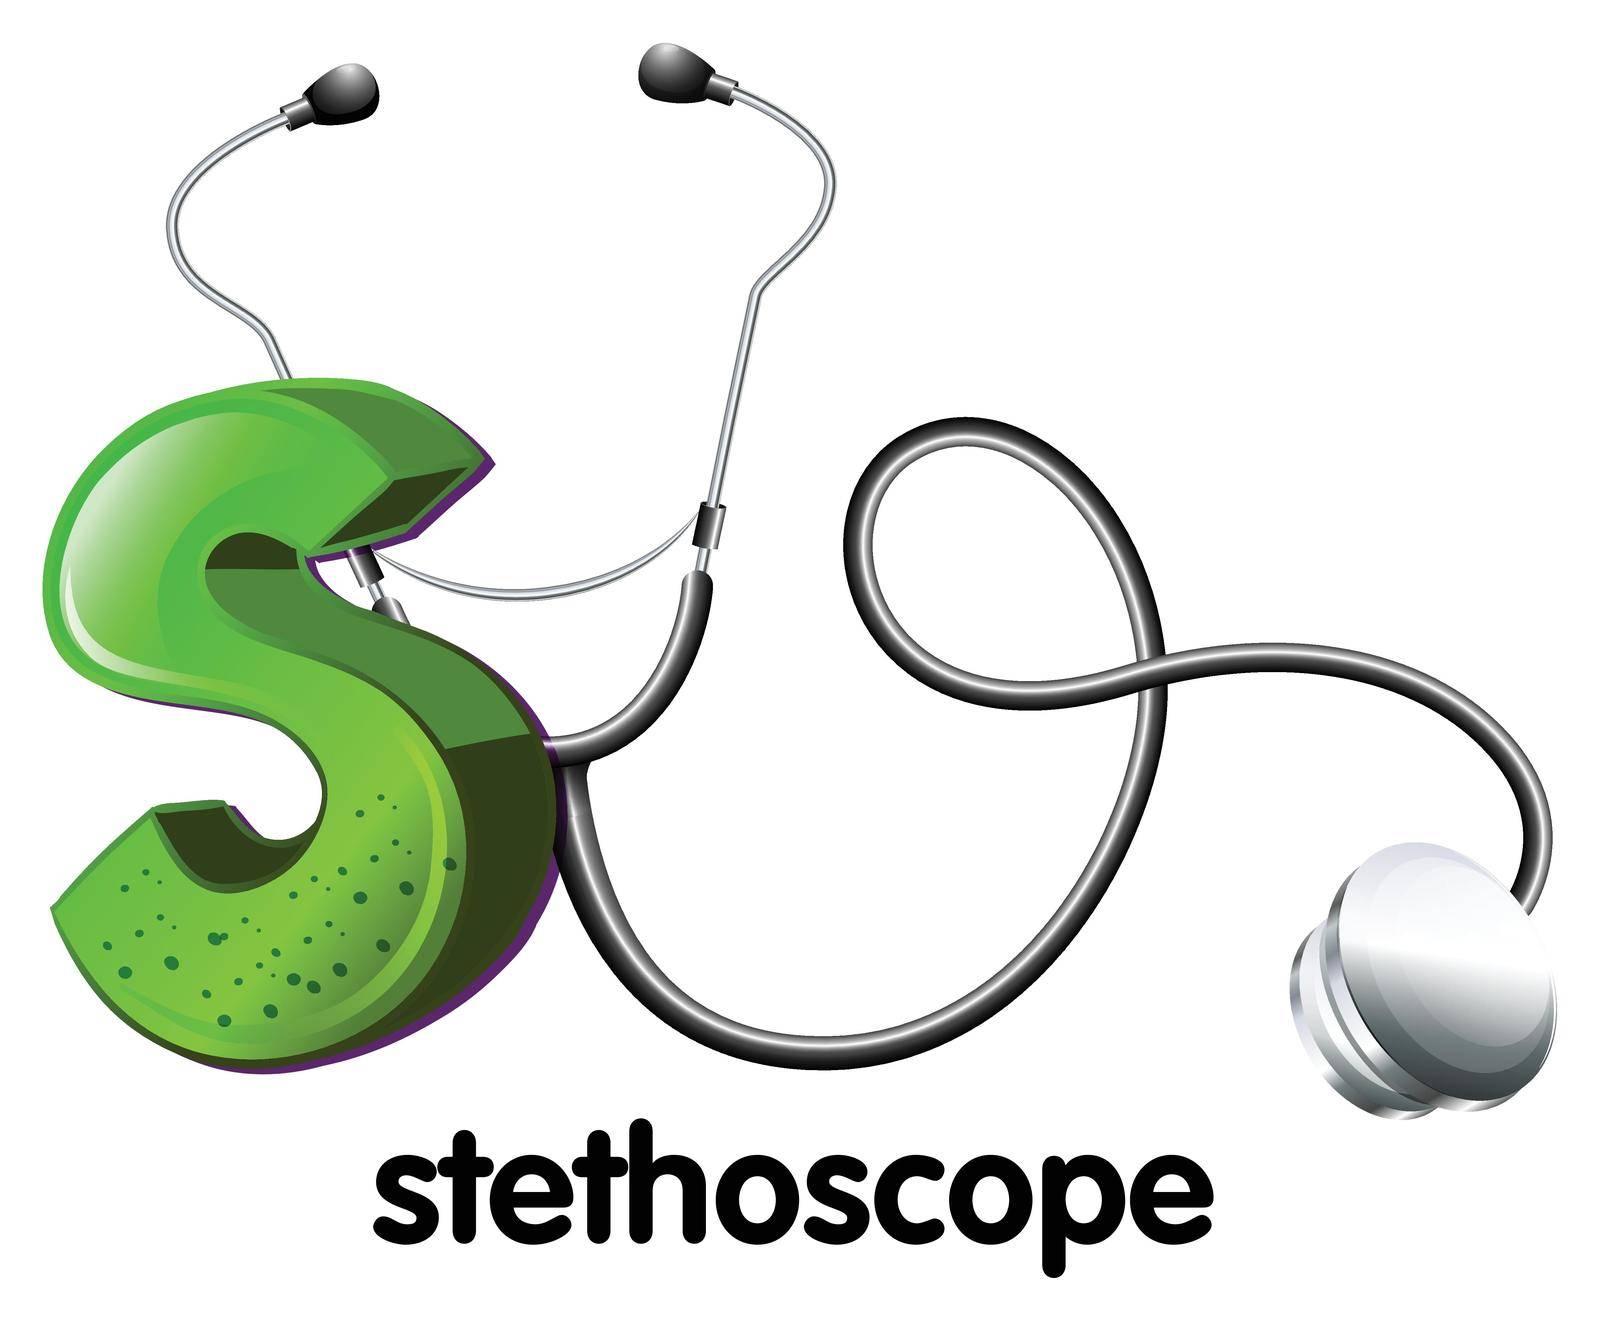 Illustration of a letter S for stethoscope on a white background